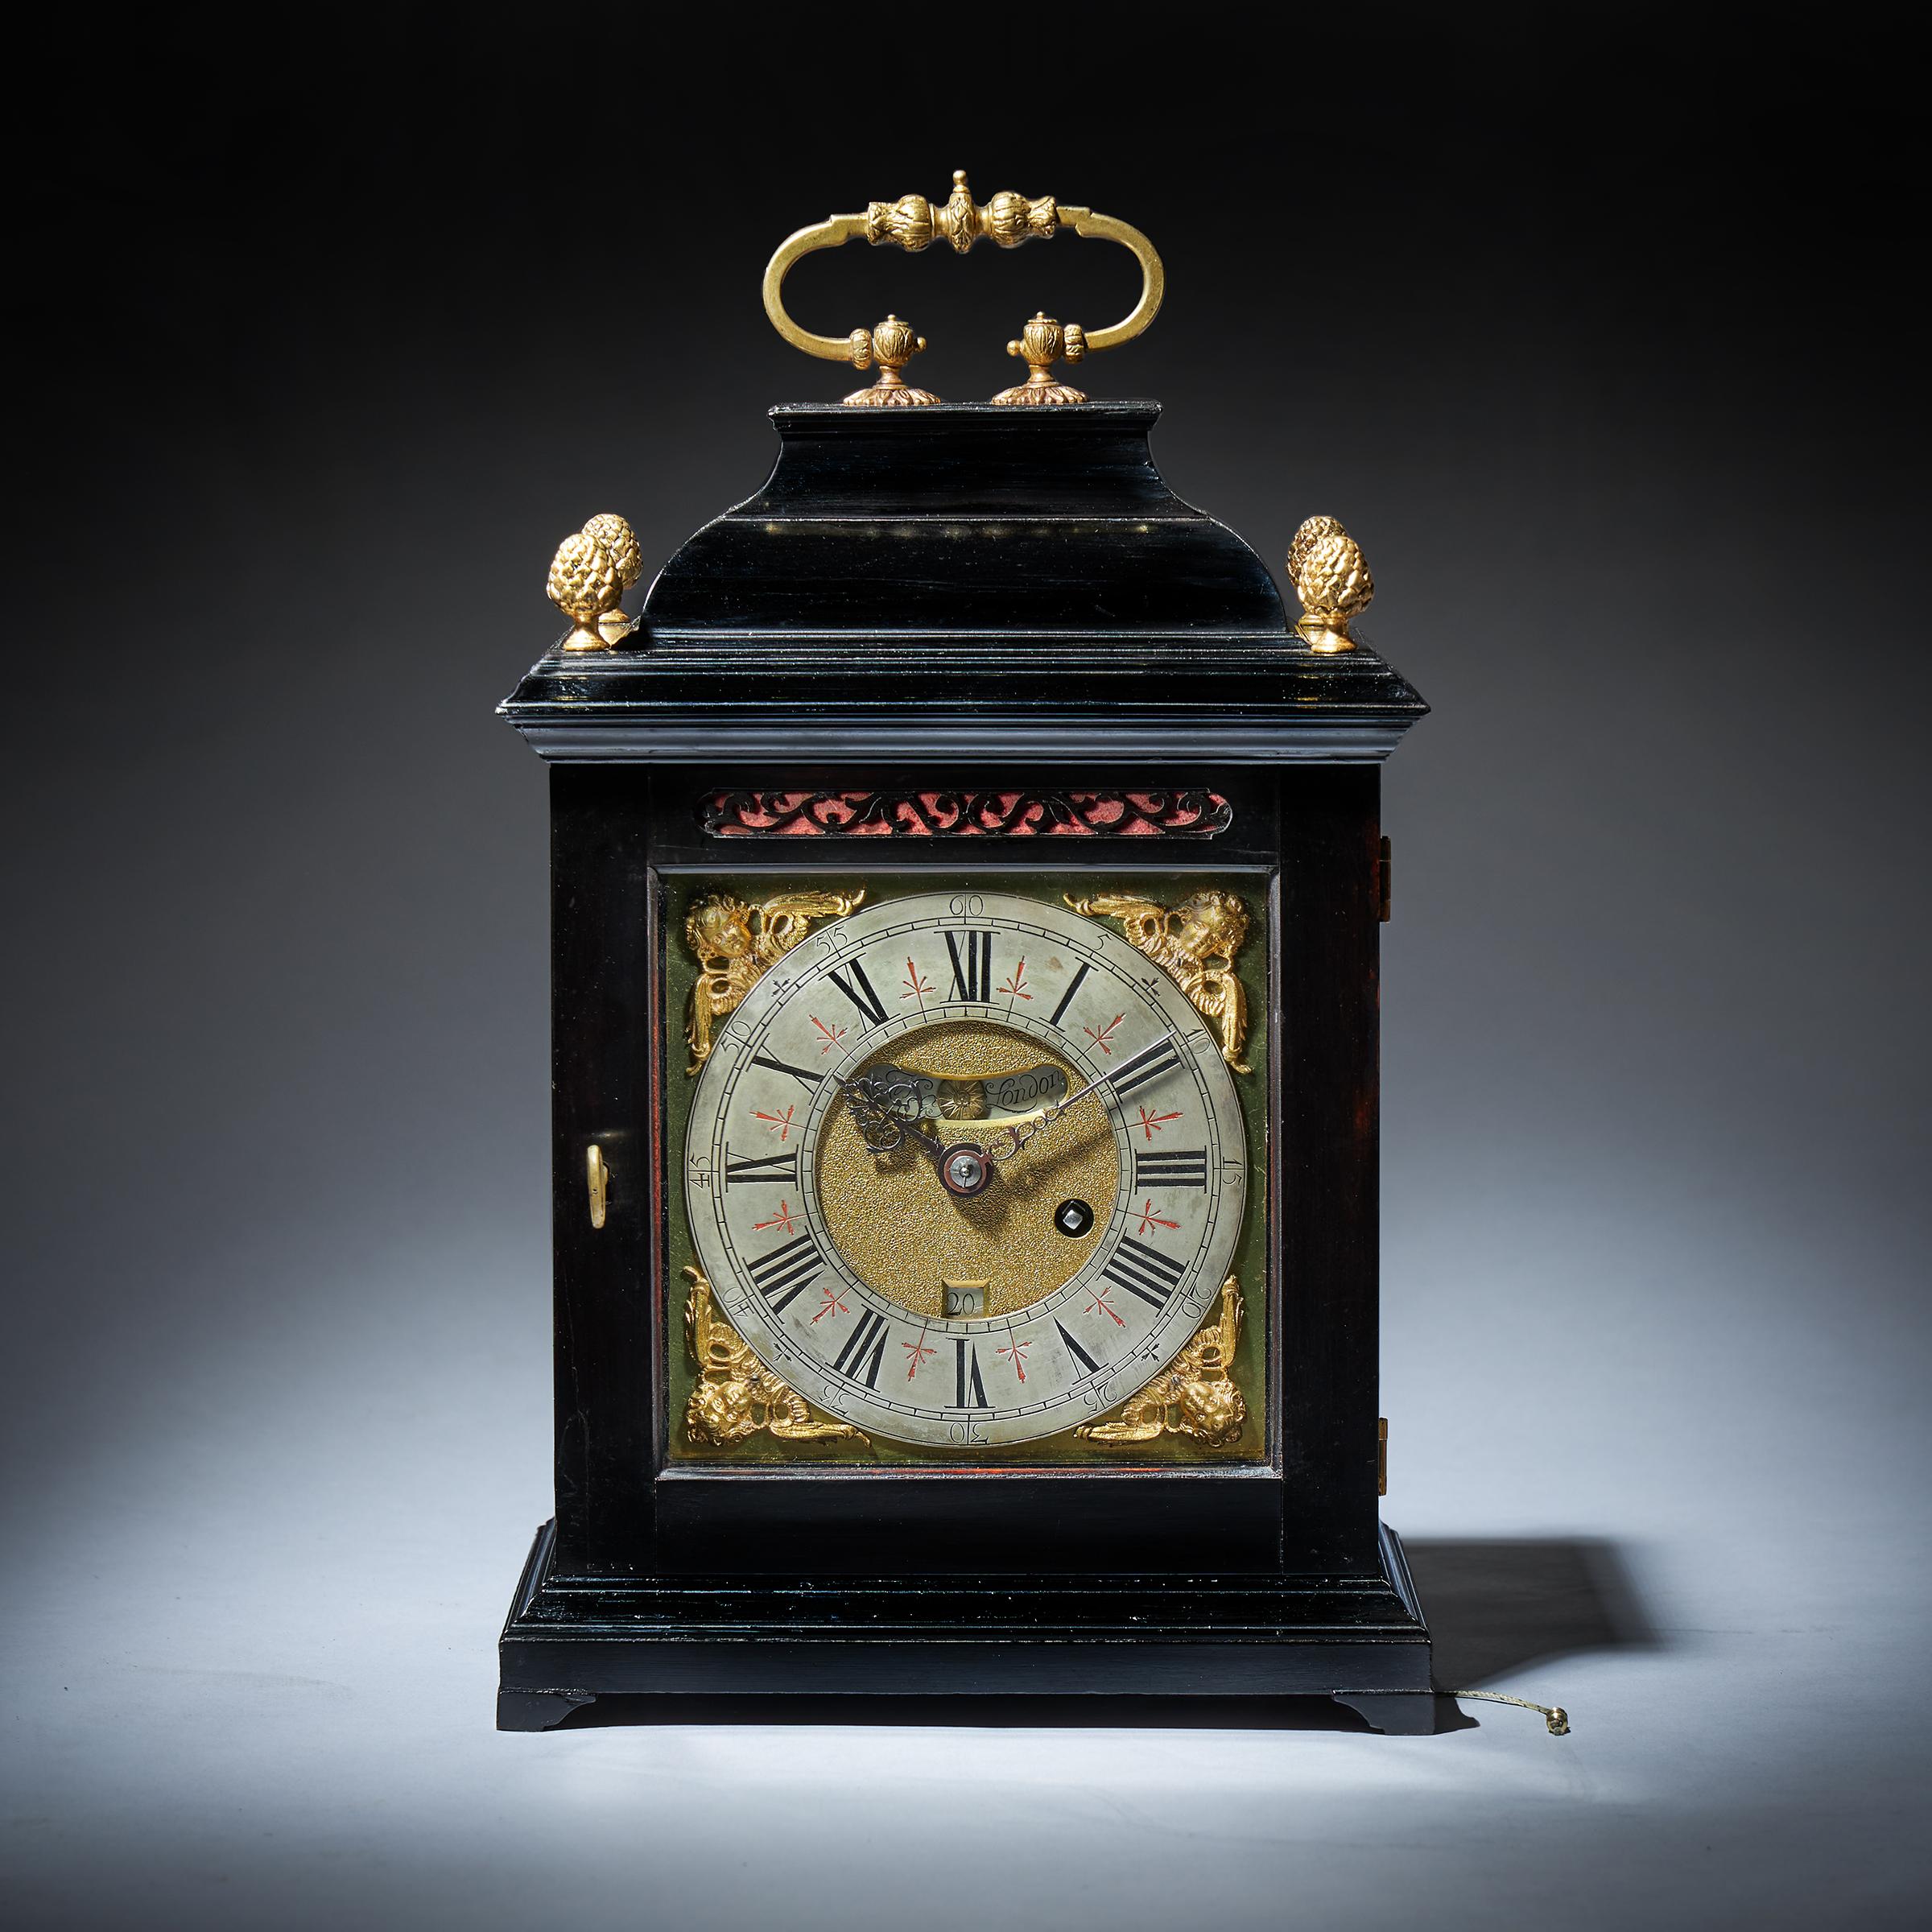 An early English eight-day spring-driven table clock signed Henry Massy London, dating to the period c.1695-1700. 

The elegantly proportioned ebony-veneered early inverted bell top case has windows on all sides so that the movement and the